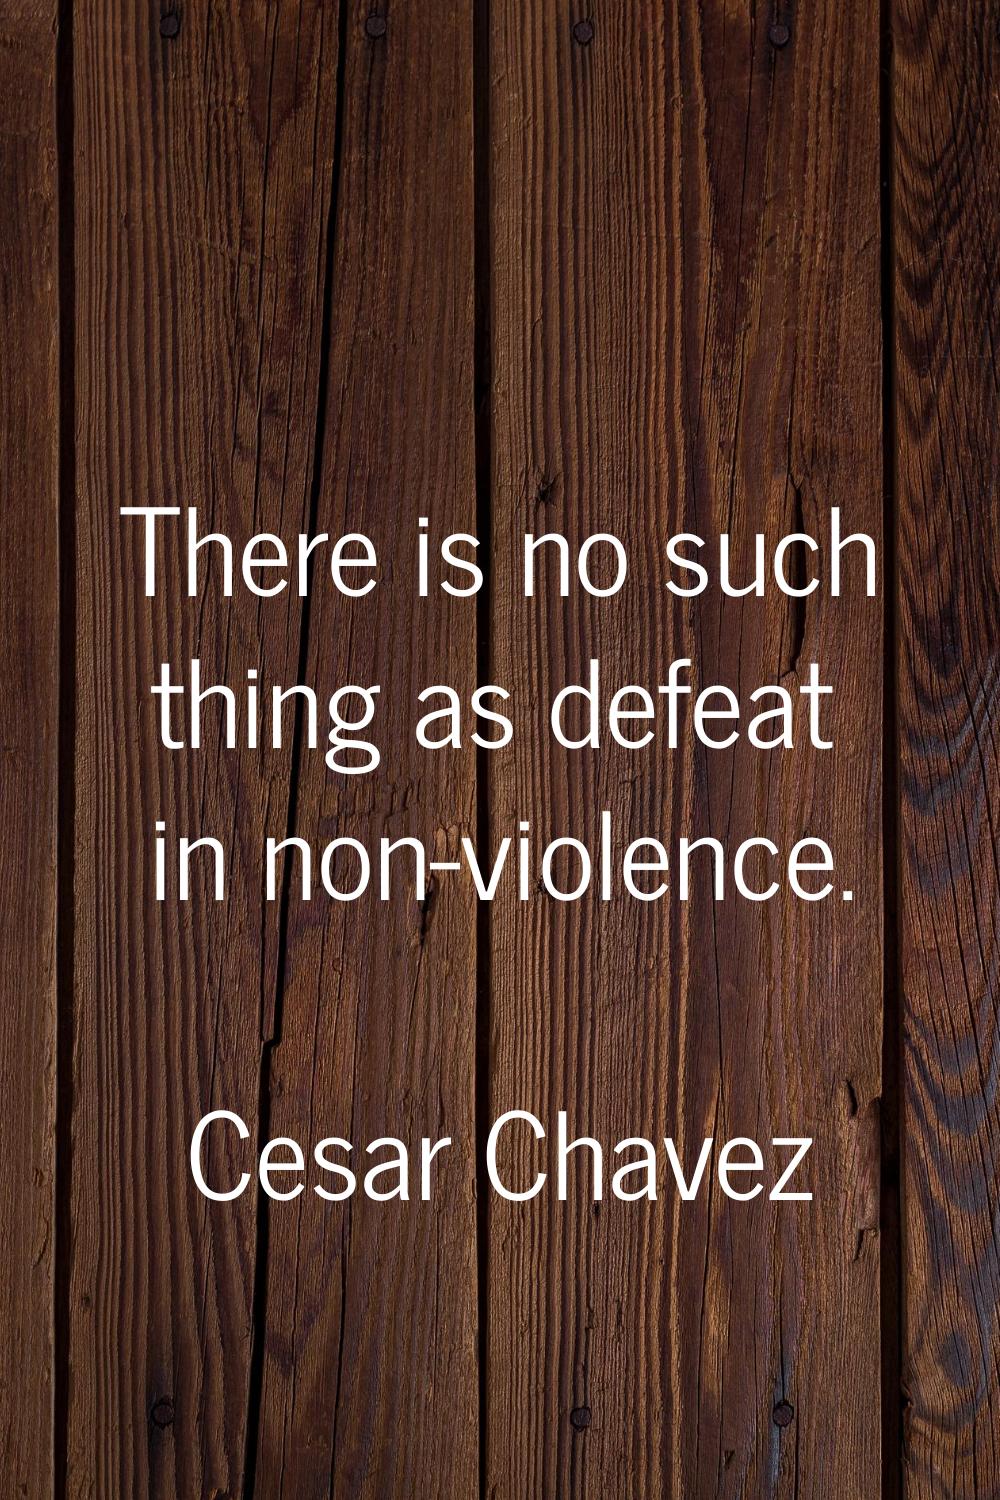 There is no such thing as defeat in non-violence.